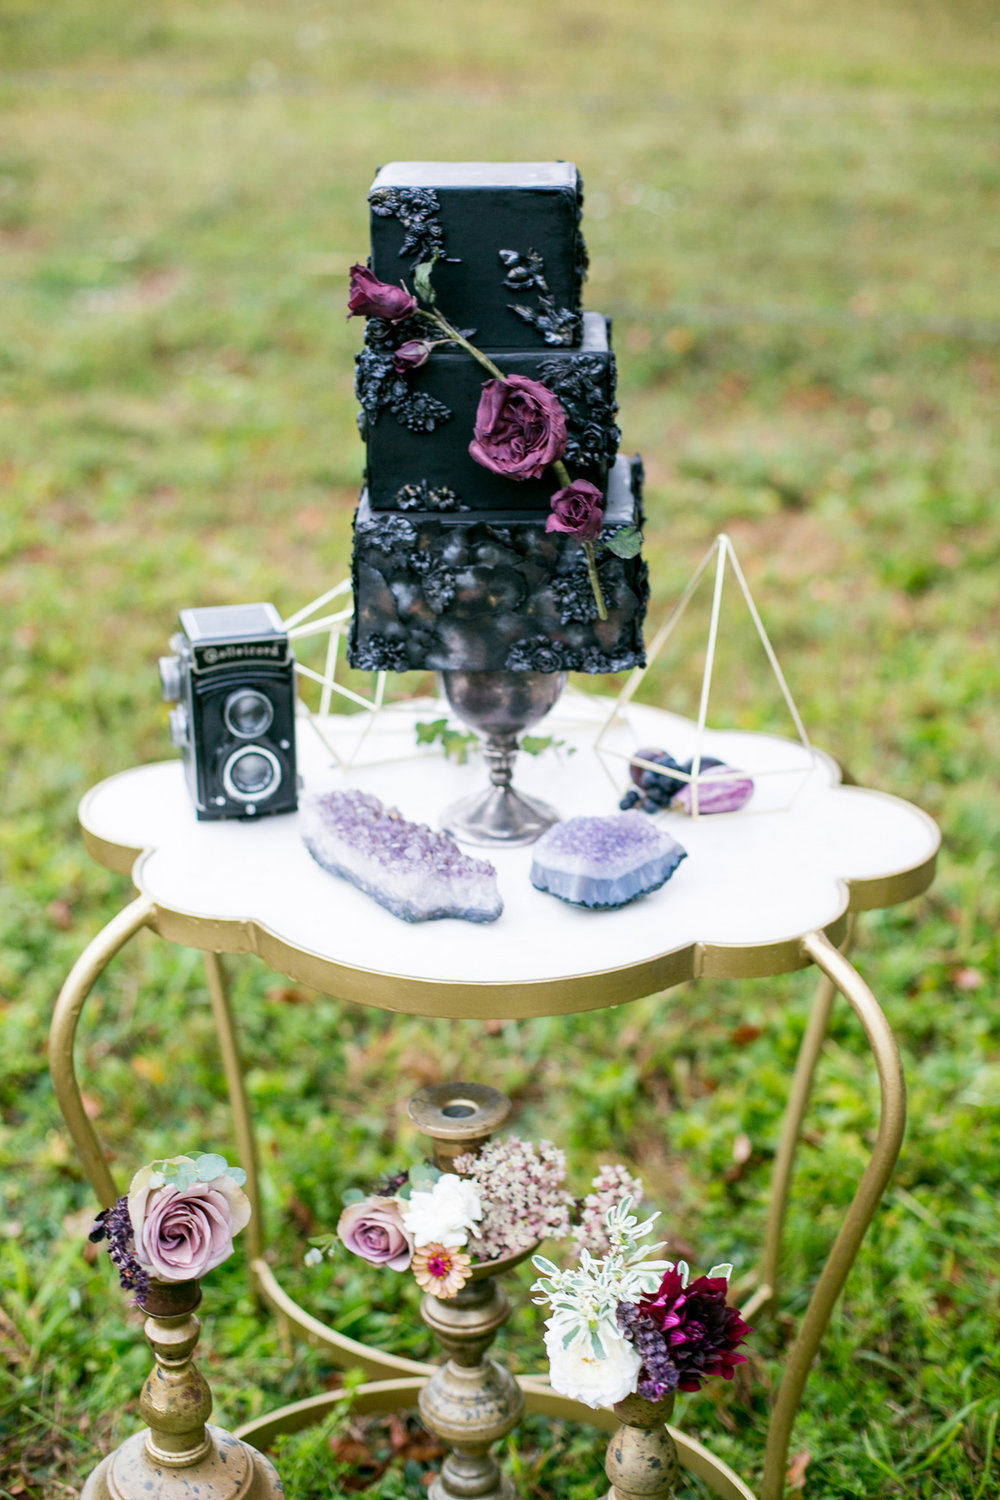  Moody and Dramatic Wedding Ideas + Inspiration —&nbsp;photo by Chantal Routhier Photography — click to see more inspiration on www.BrendasWeddingBlog.com 